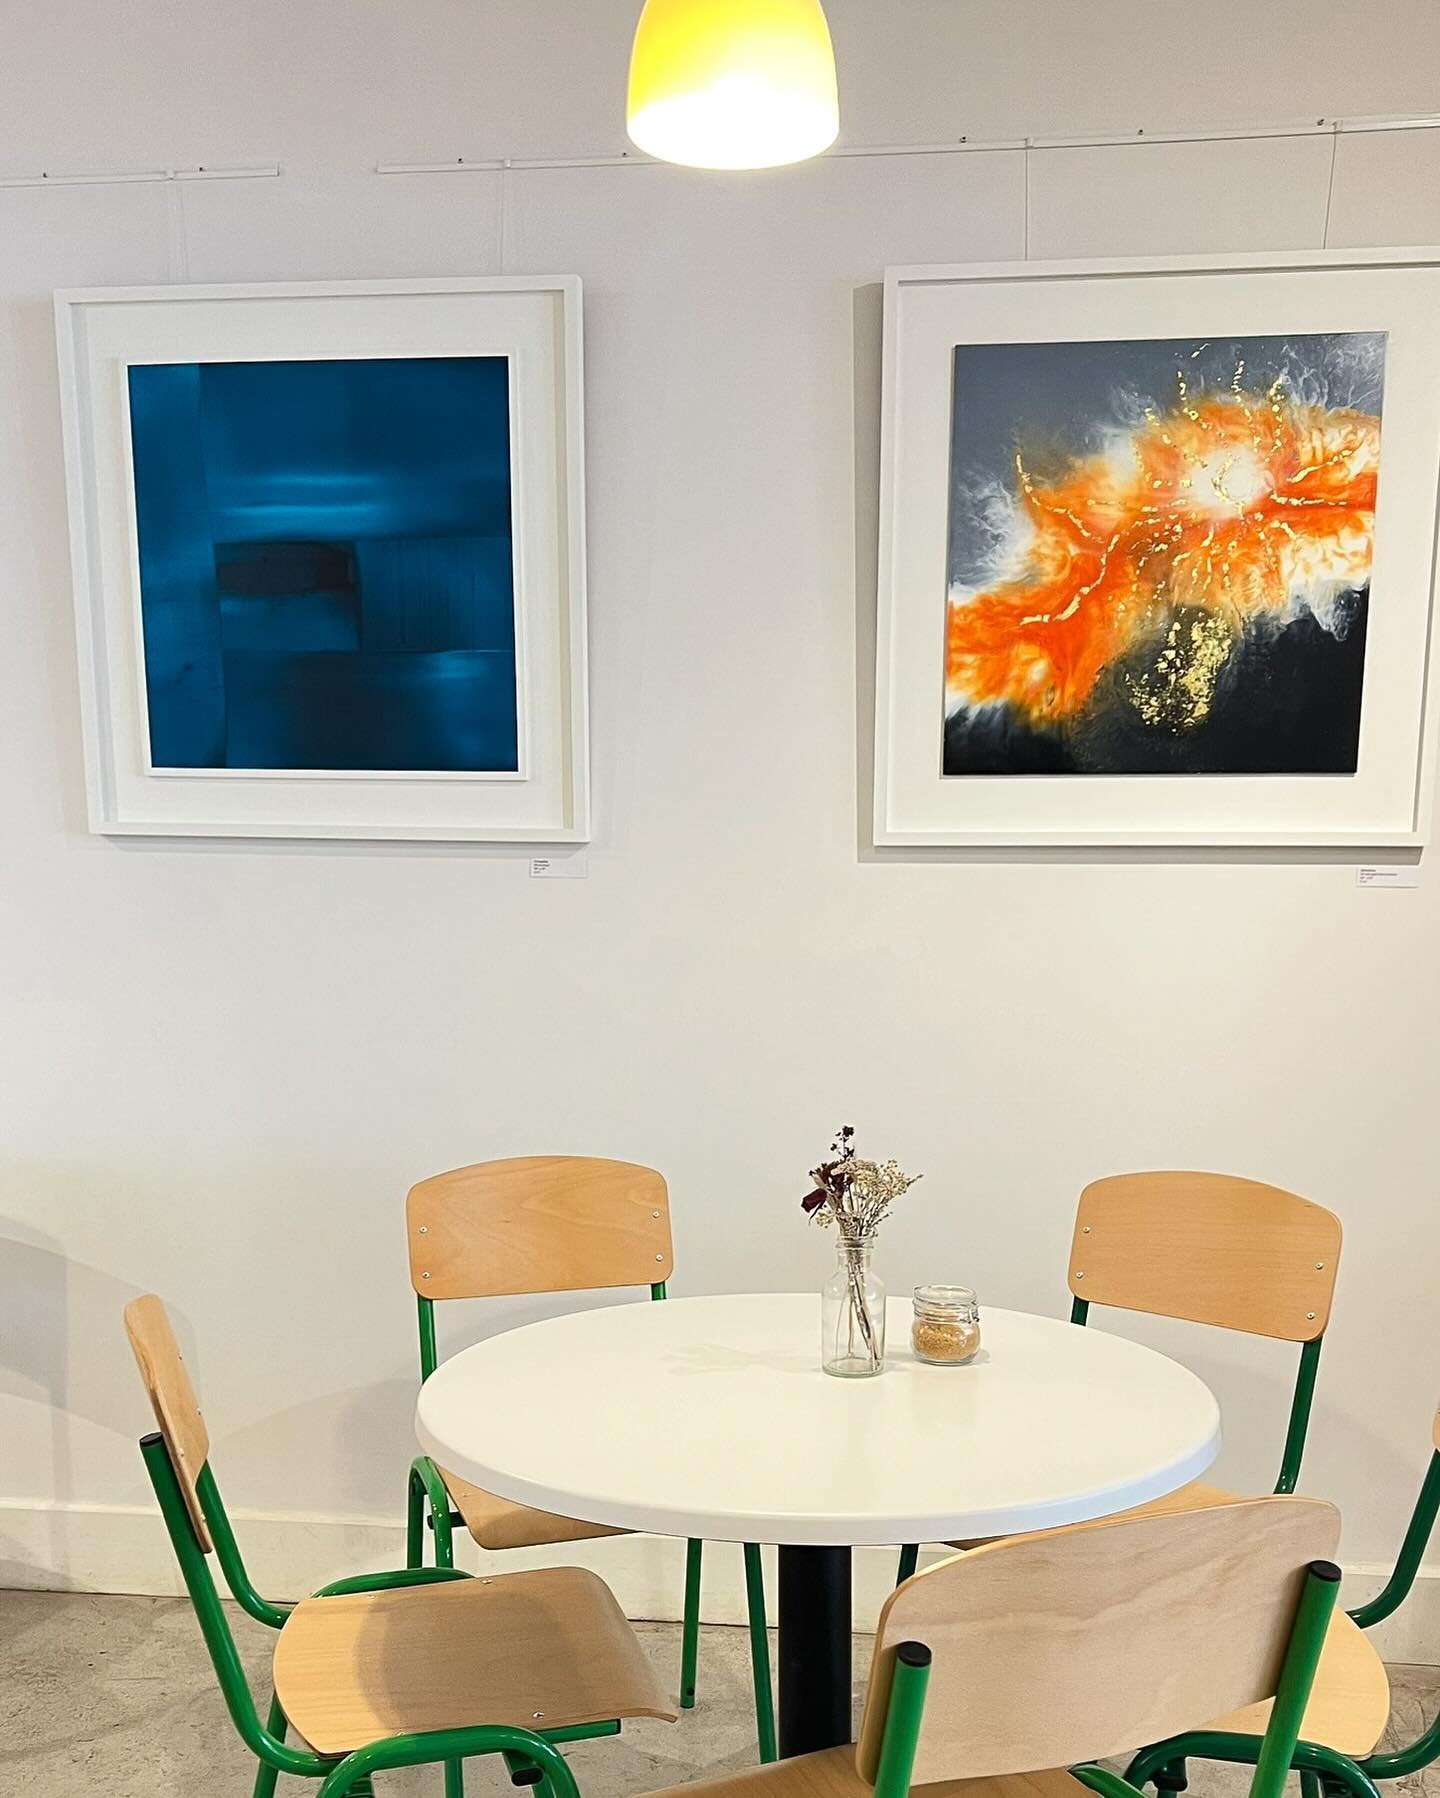 Nora Doherty

This month we&rsquo;ve got some striking abstract pieces on display at Butterwalk from Teignmouth artist Nora Doherty. Perfect for gazing into and finding your own meaning while sipping your coffee.

Exhibiting until 4th June, all of No